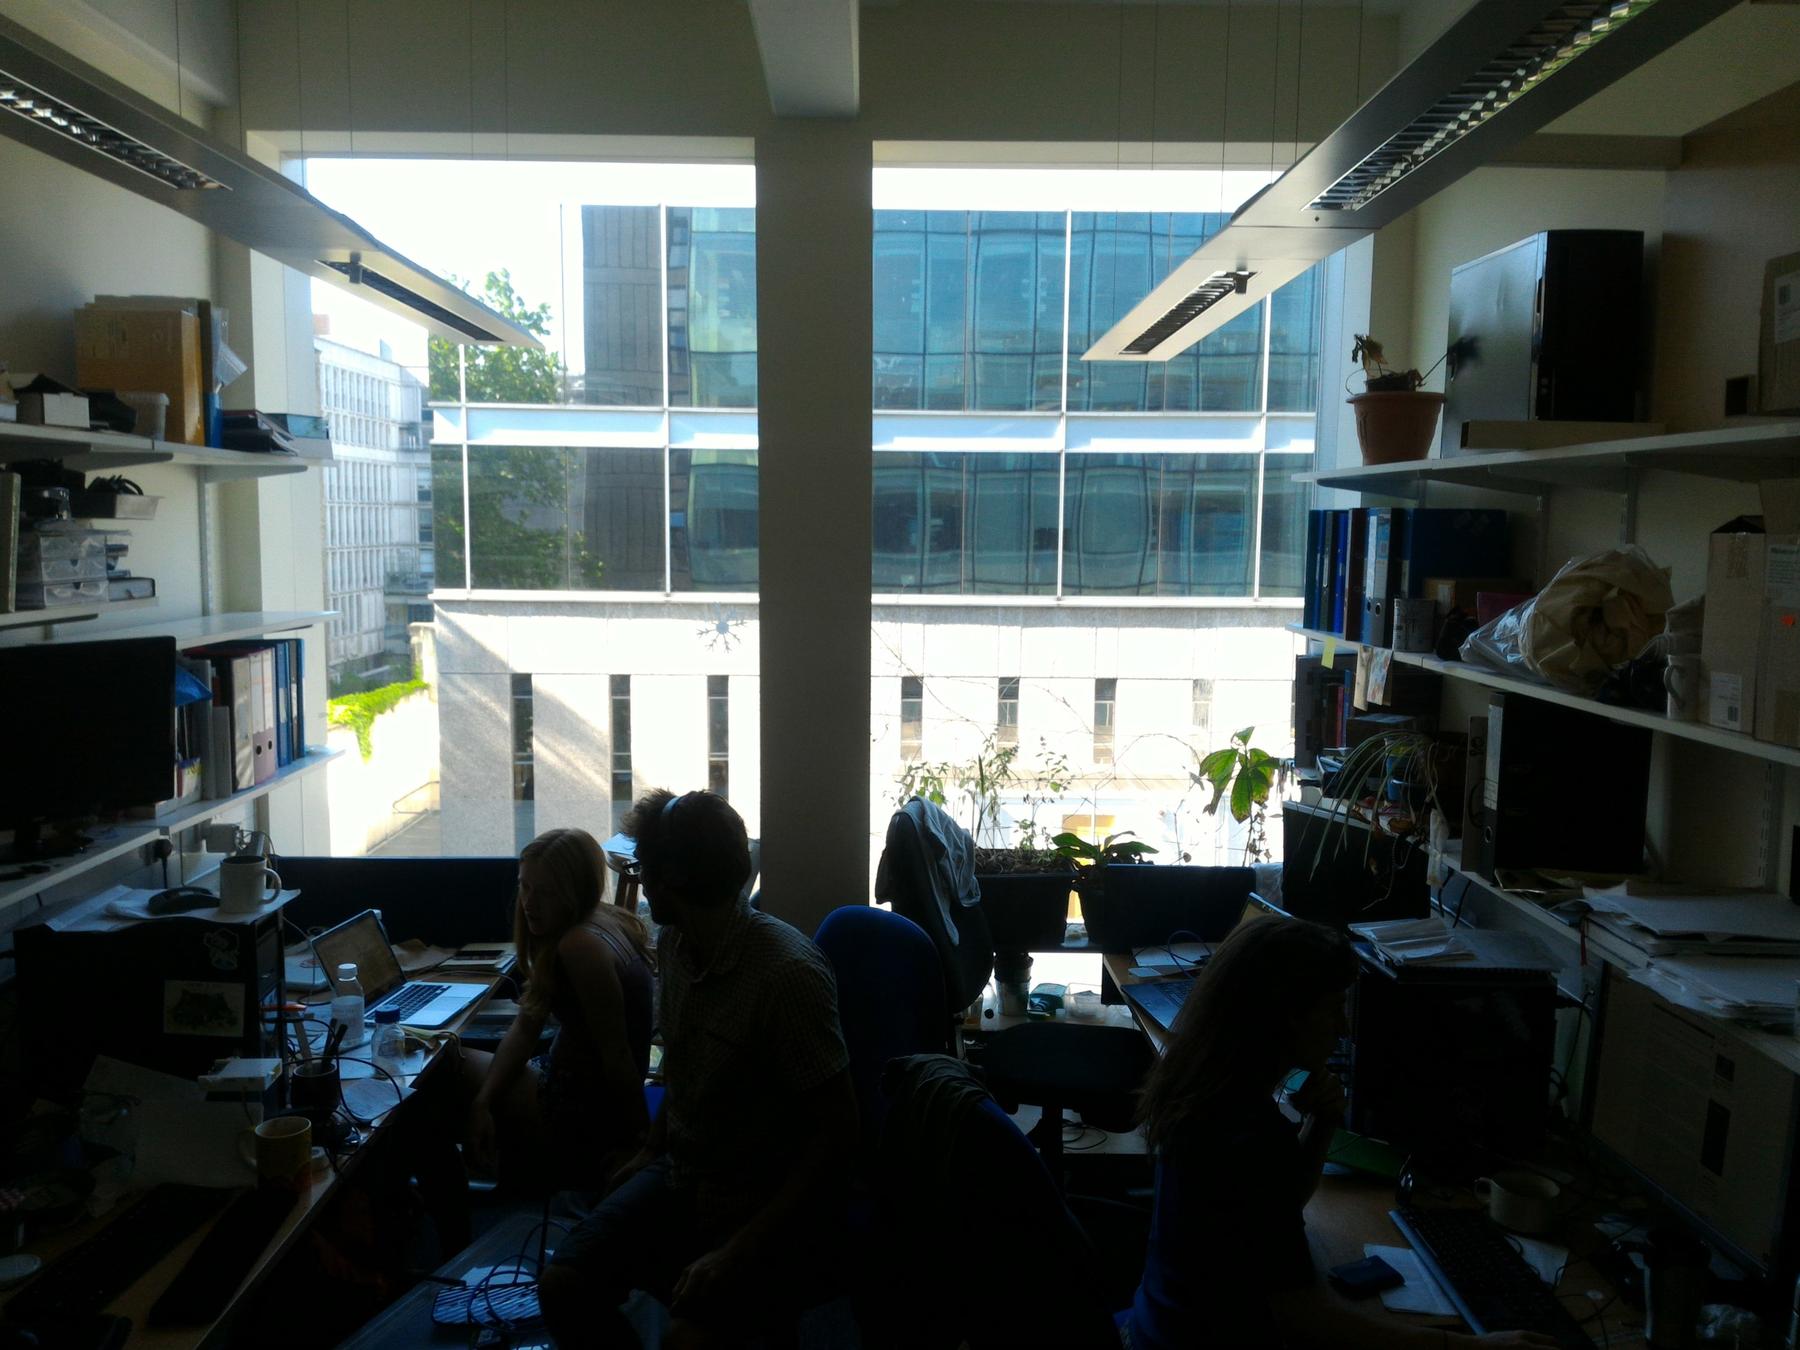 Our office space